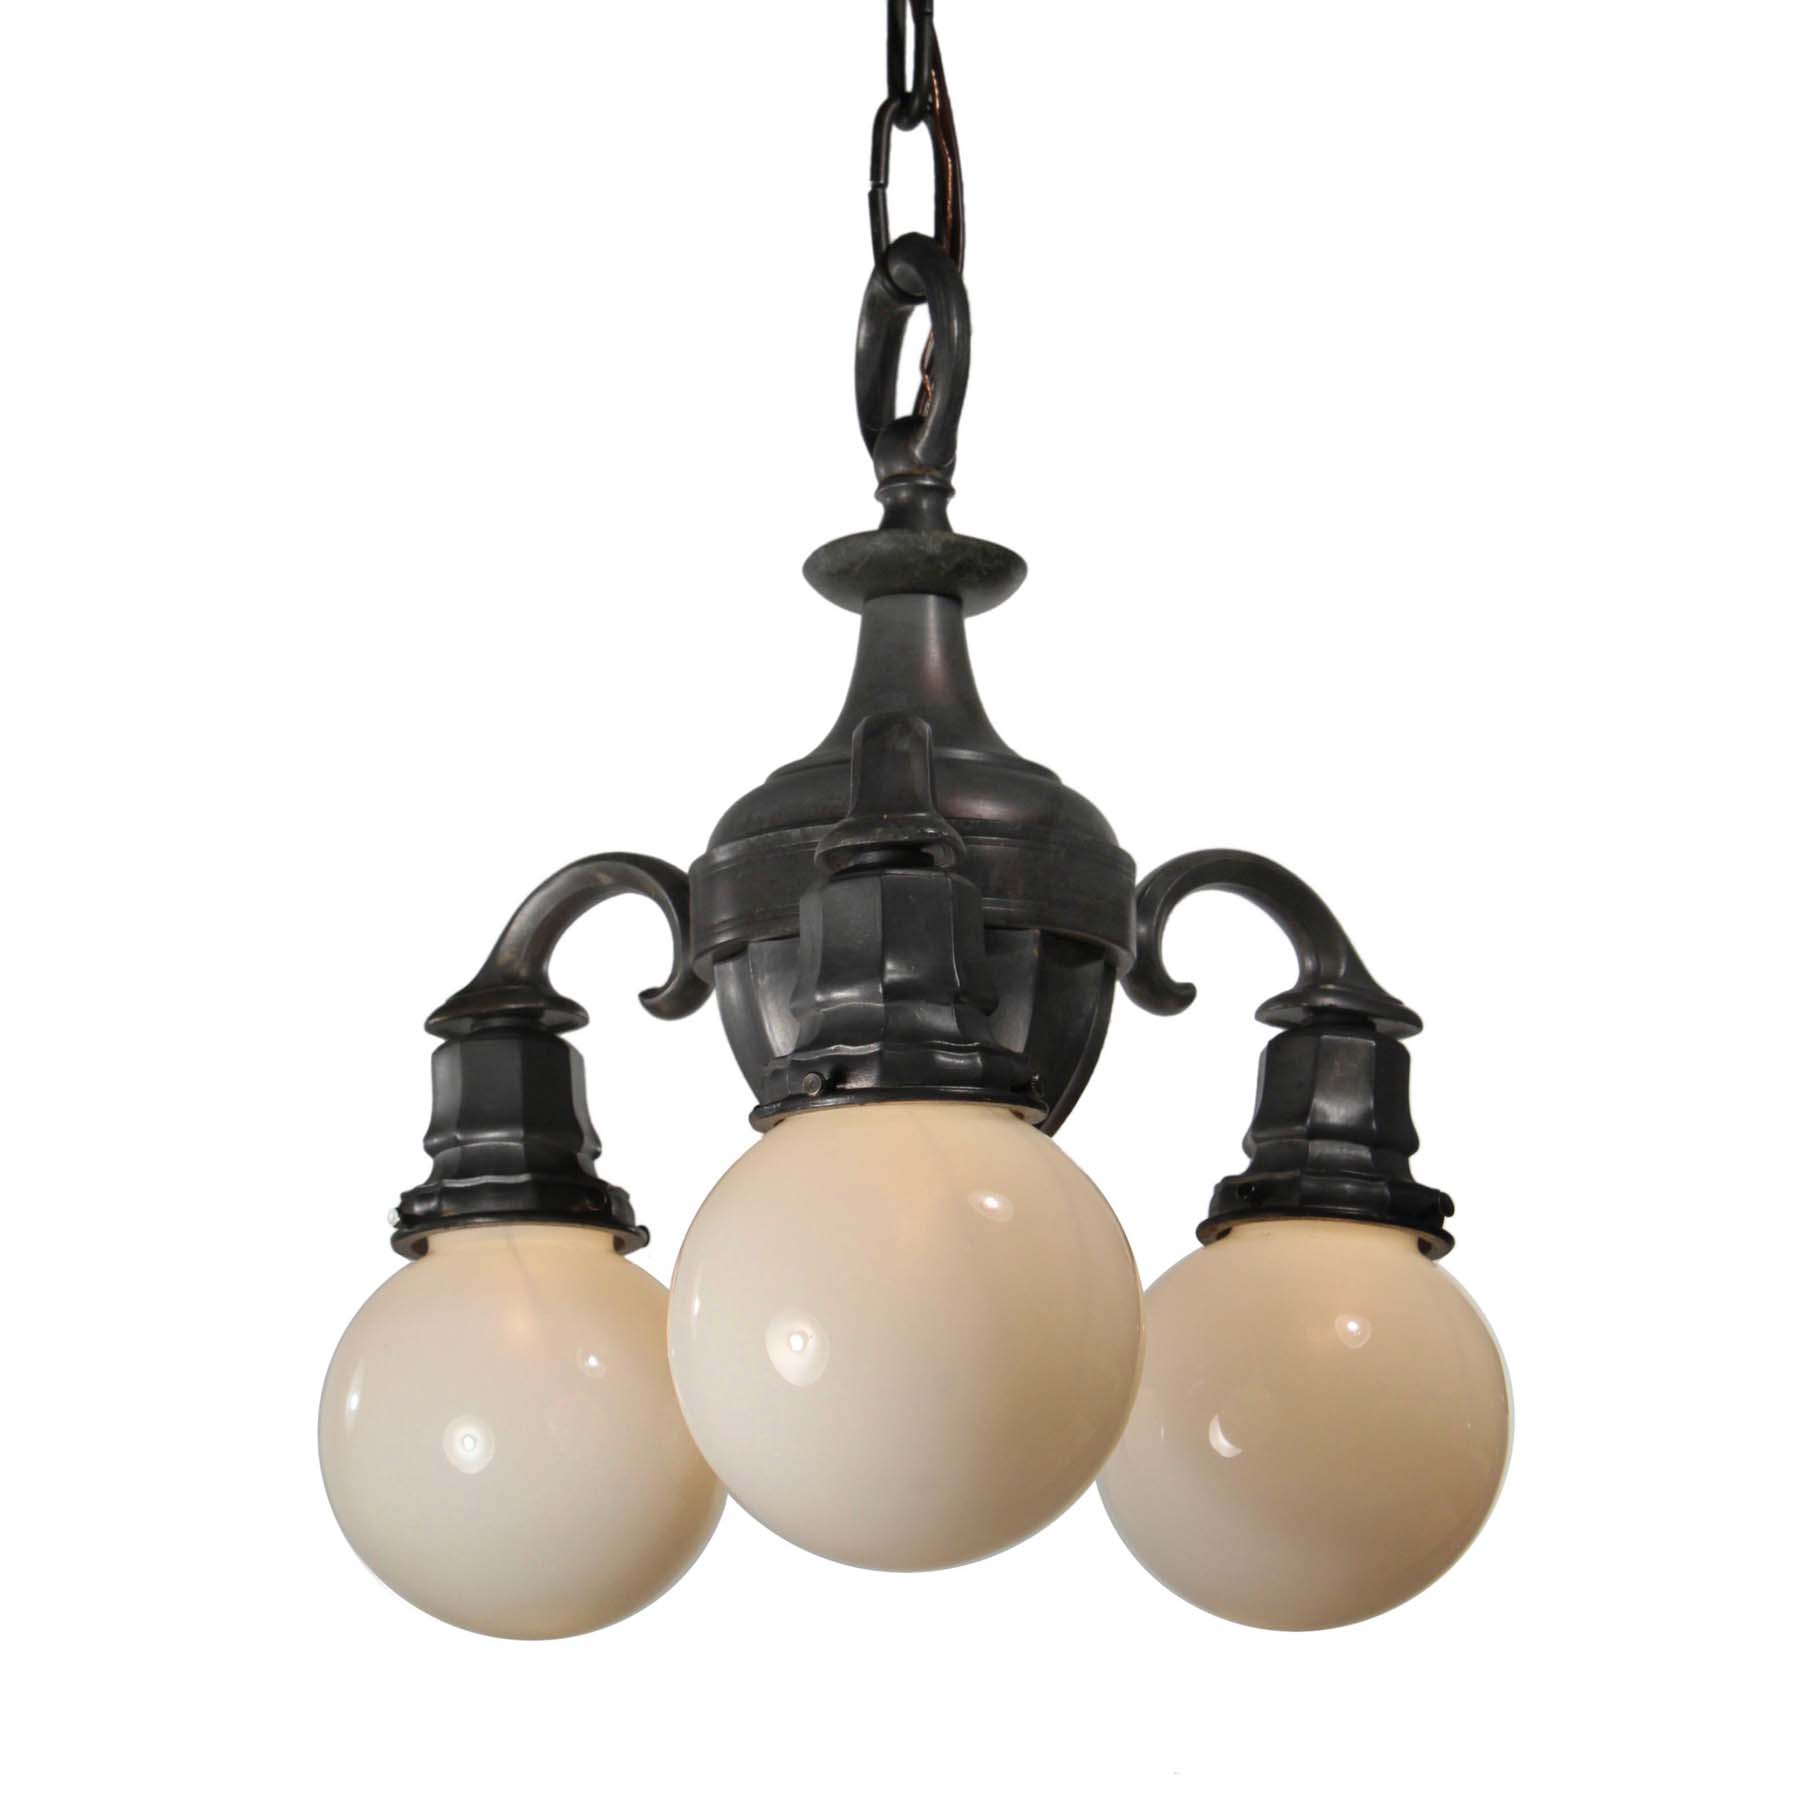 SOLD Chandelier with Glass Globes, Antique Lighting-0